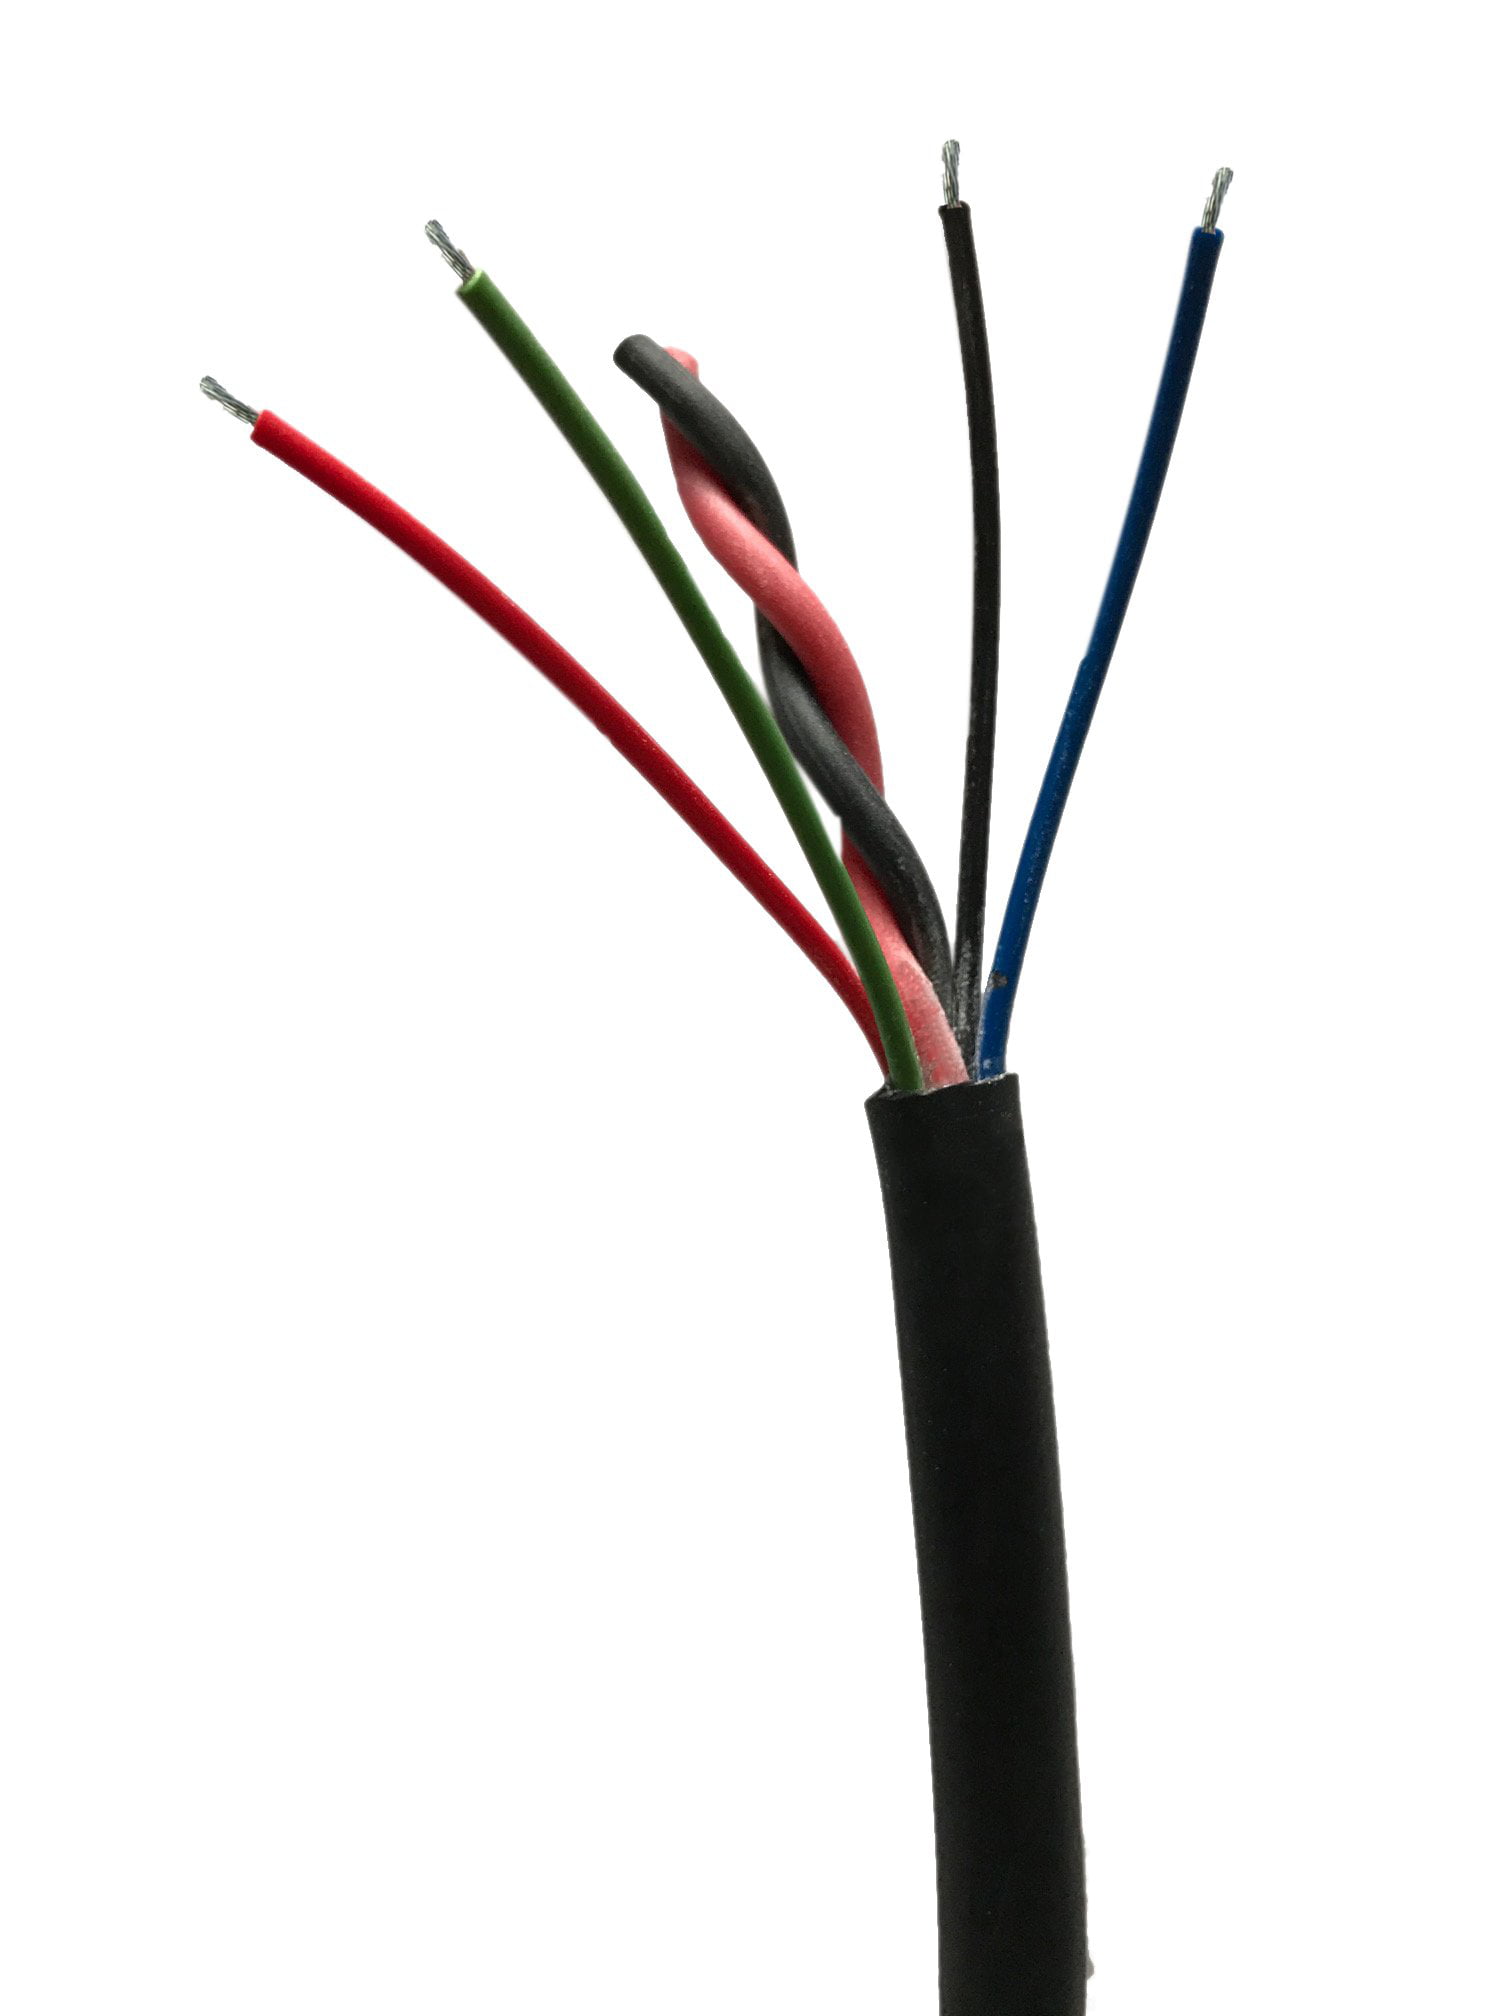 Memphis SW16LED500 Marine-rated Cable w/ 16 Gauge Speaker Wire/20 Gauge RGB  LED Wire - Walmart.com  20 Conductor Tractor Radio Wiring Diagram    Walmart